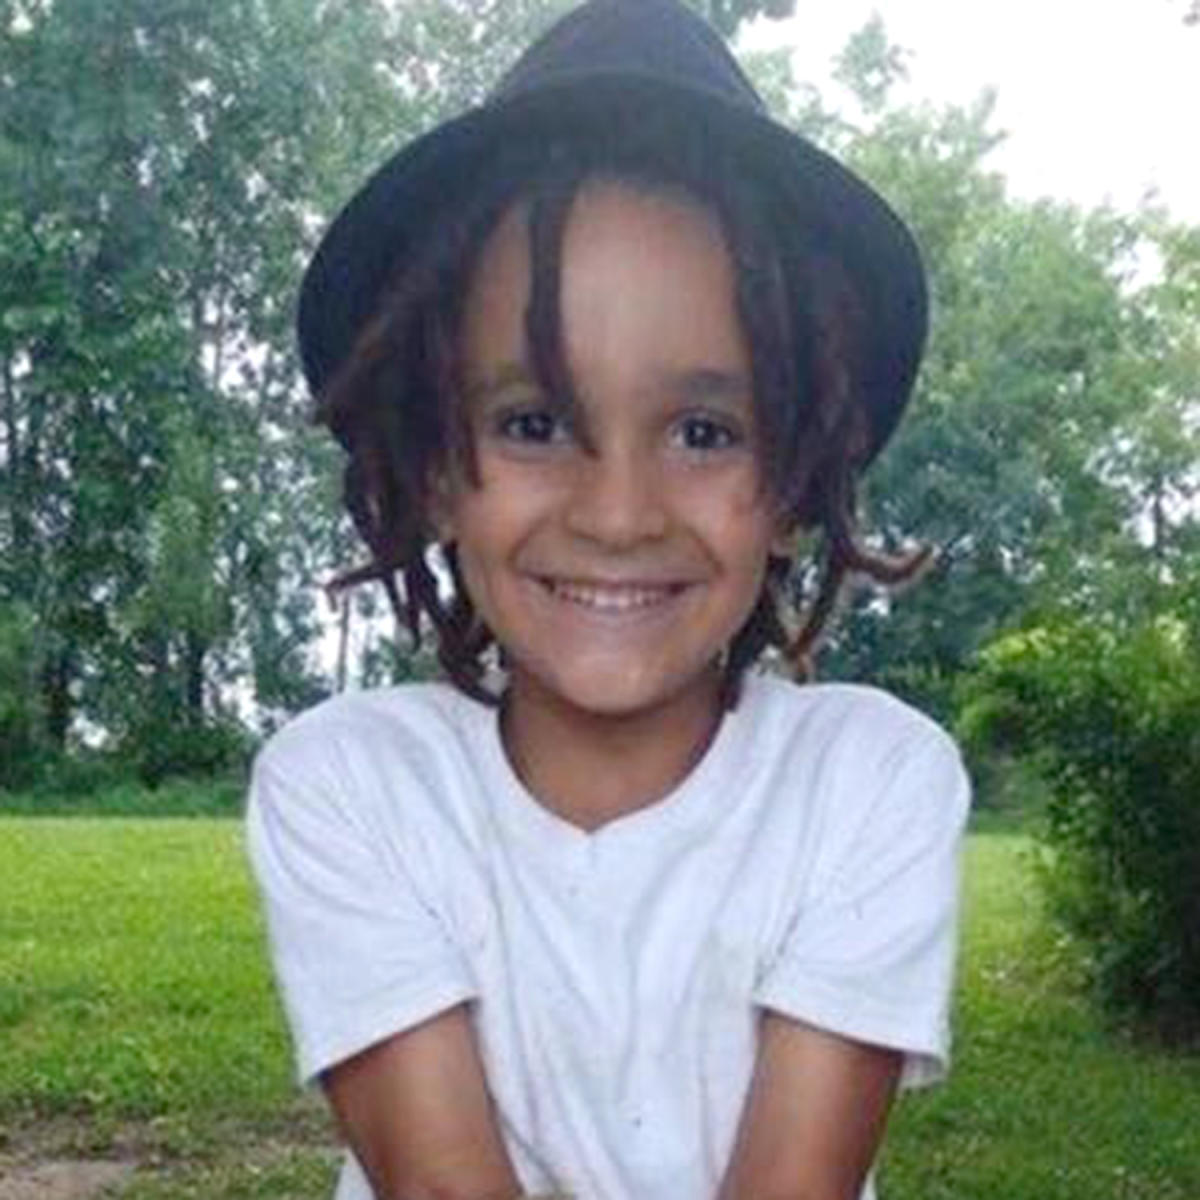 arrest-made-in-killing-of-milwaukee-6-year-old-shot-while-saying